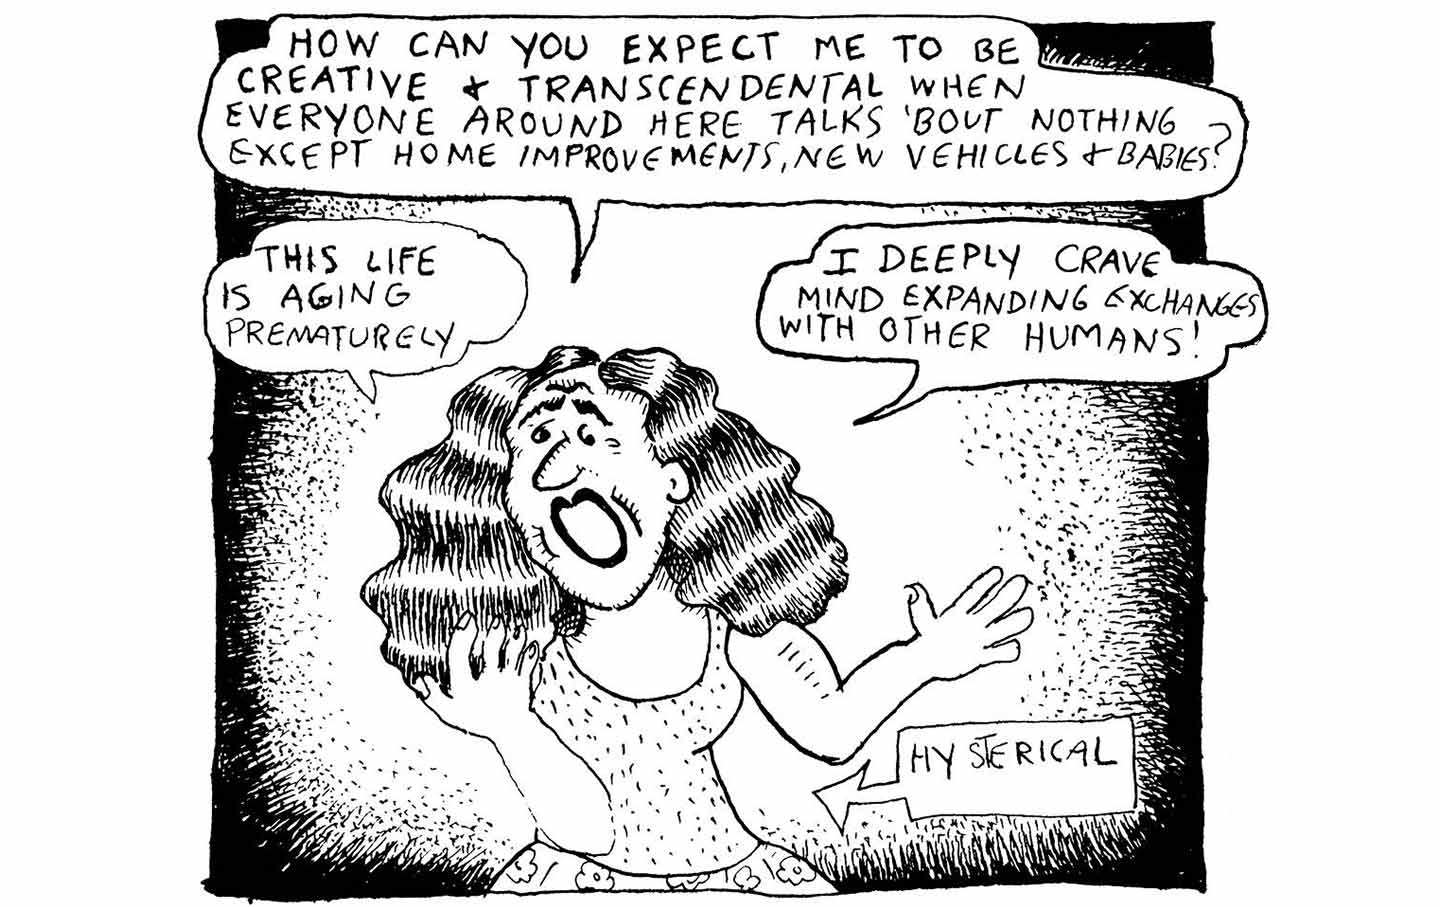 A panel from Love That Bunch, by Aline Kominsky-Crumb